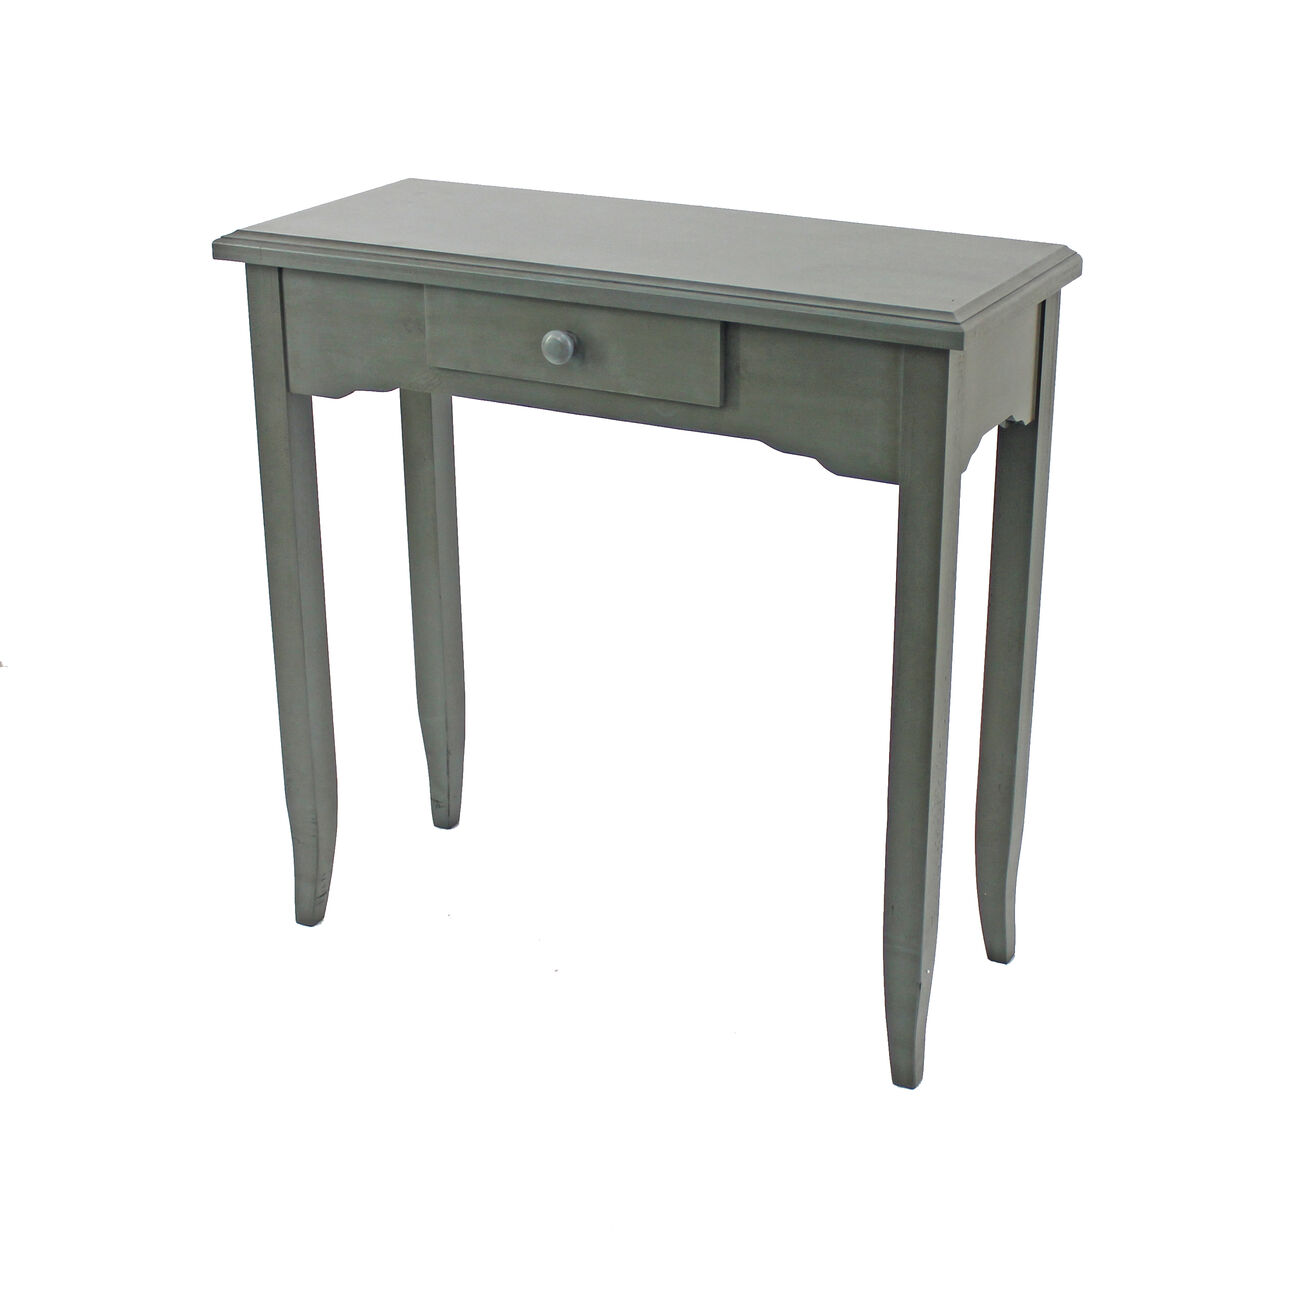 Wooden Console Table with 1 Drawer and Flared Leg Support, Gray